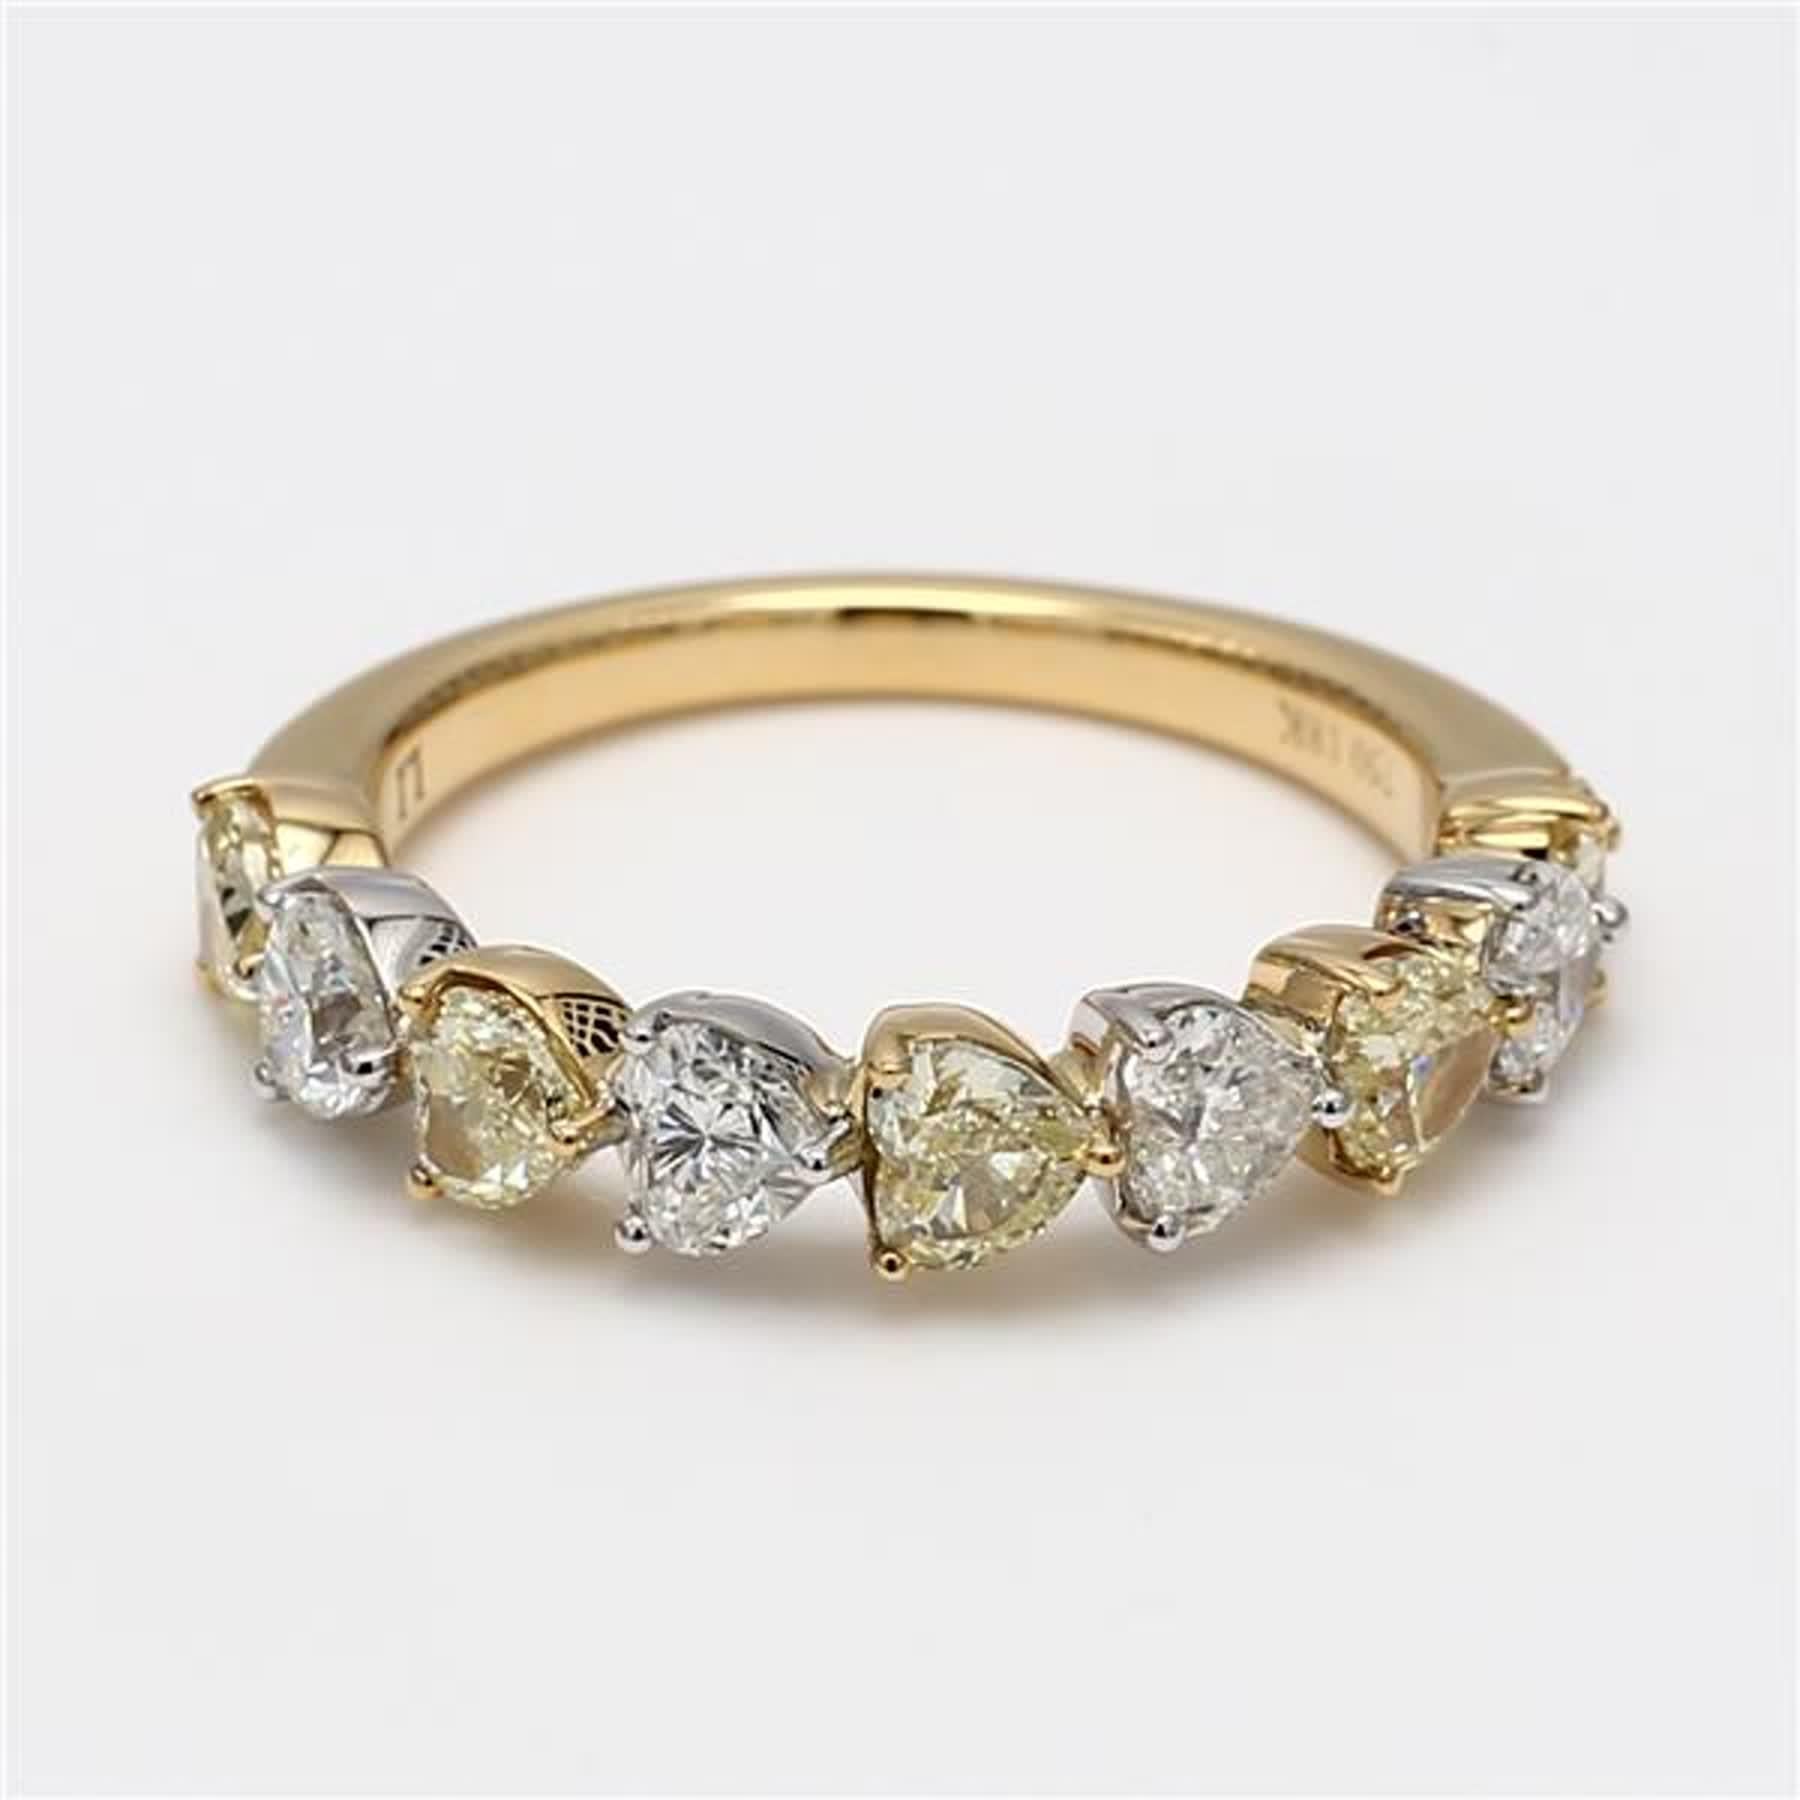 RareGemWorld's classic diamond band. Mounted in a beautiful 18K Yellow and White Gold setting with natural heart cut yellow diamonds complimented by natural heart cut white diamonds. This band is guaranteed to impress and enhance your personal